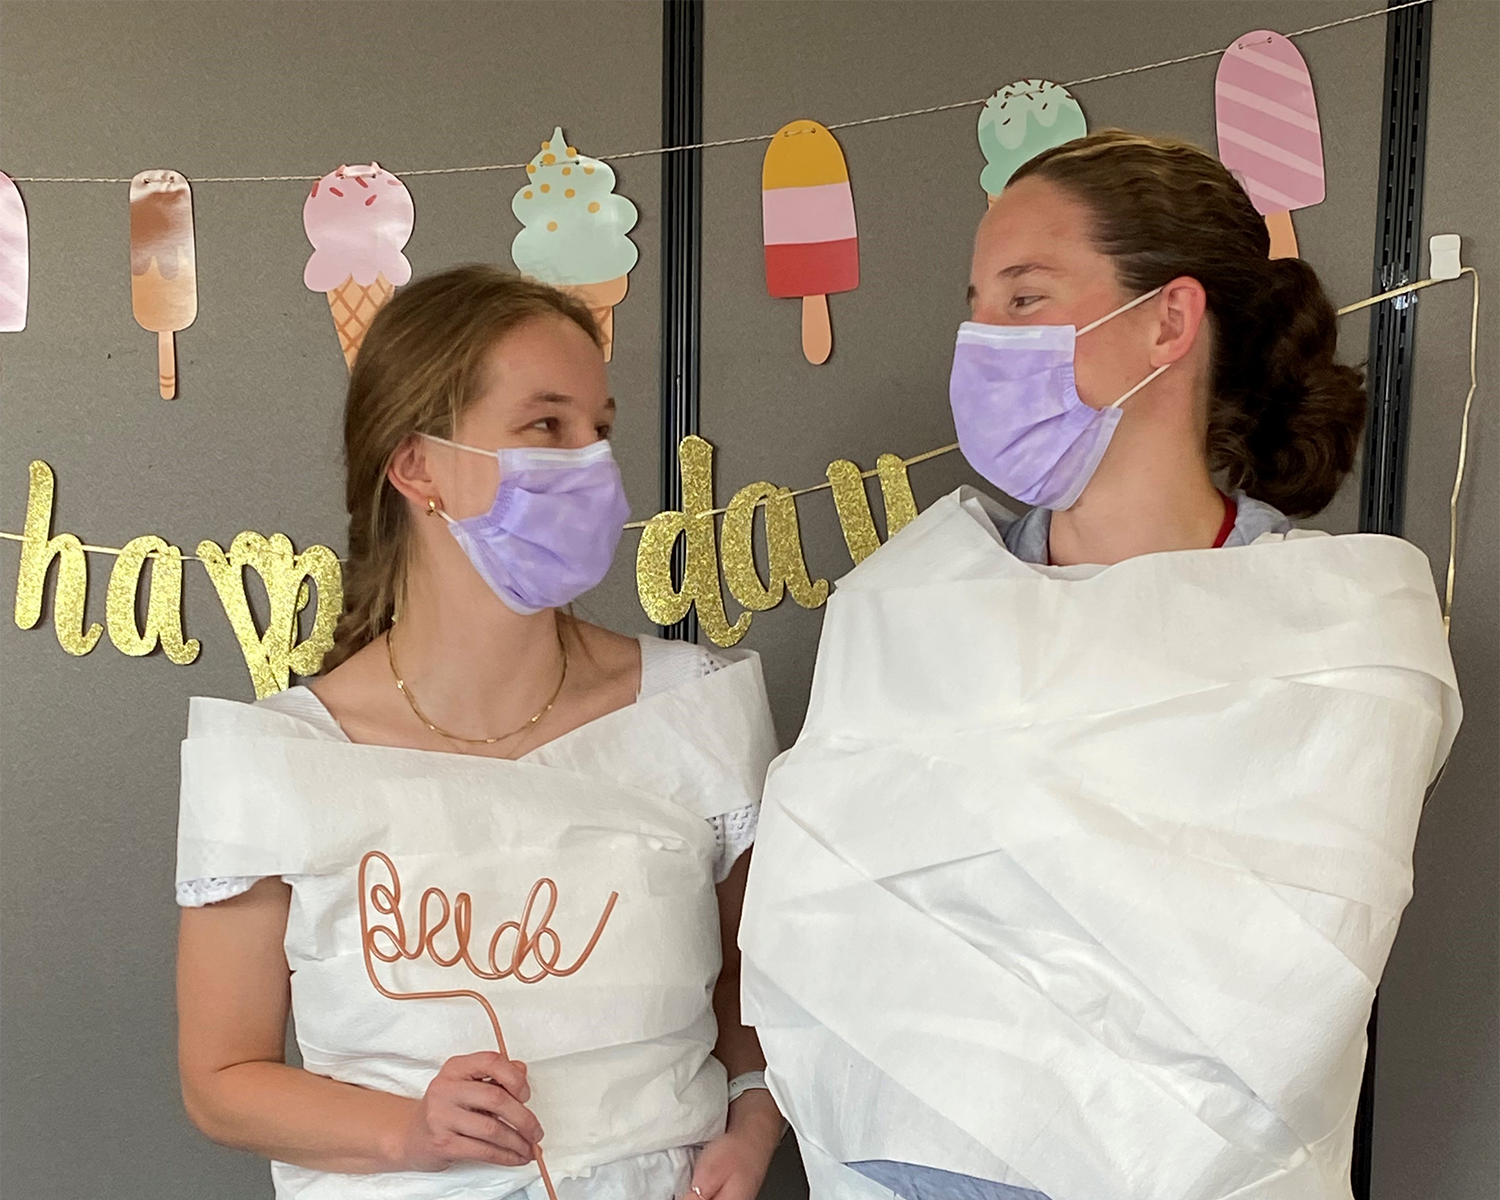 Two women wearing masks and one of them wrapped in toilet paper from a game